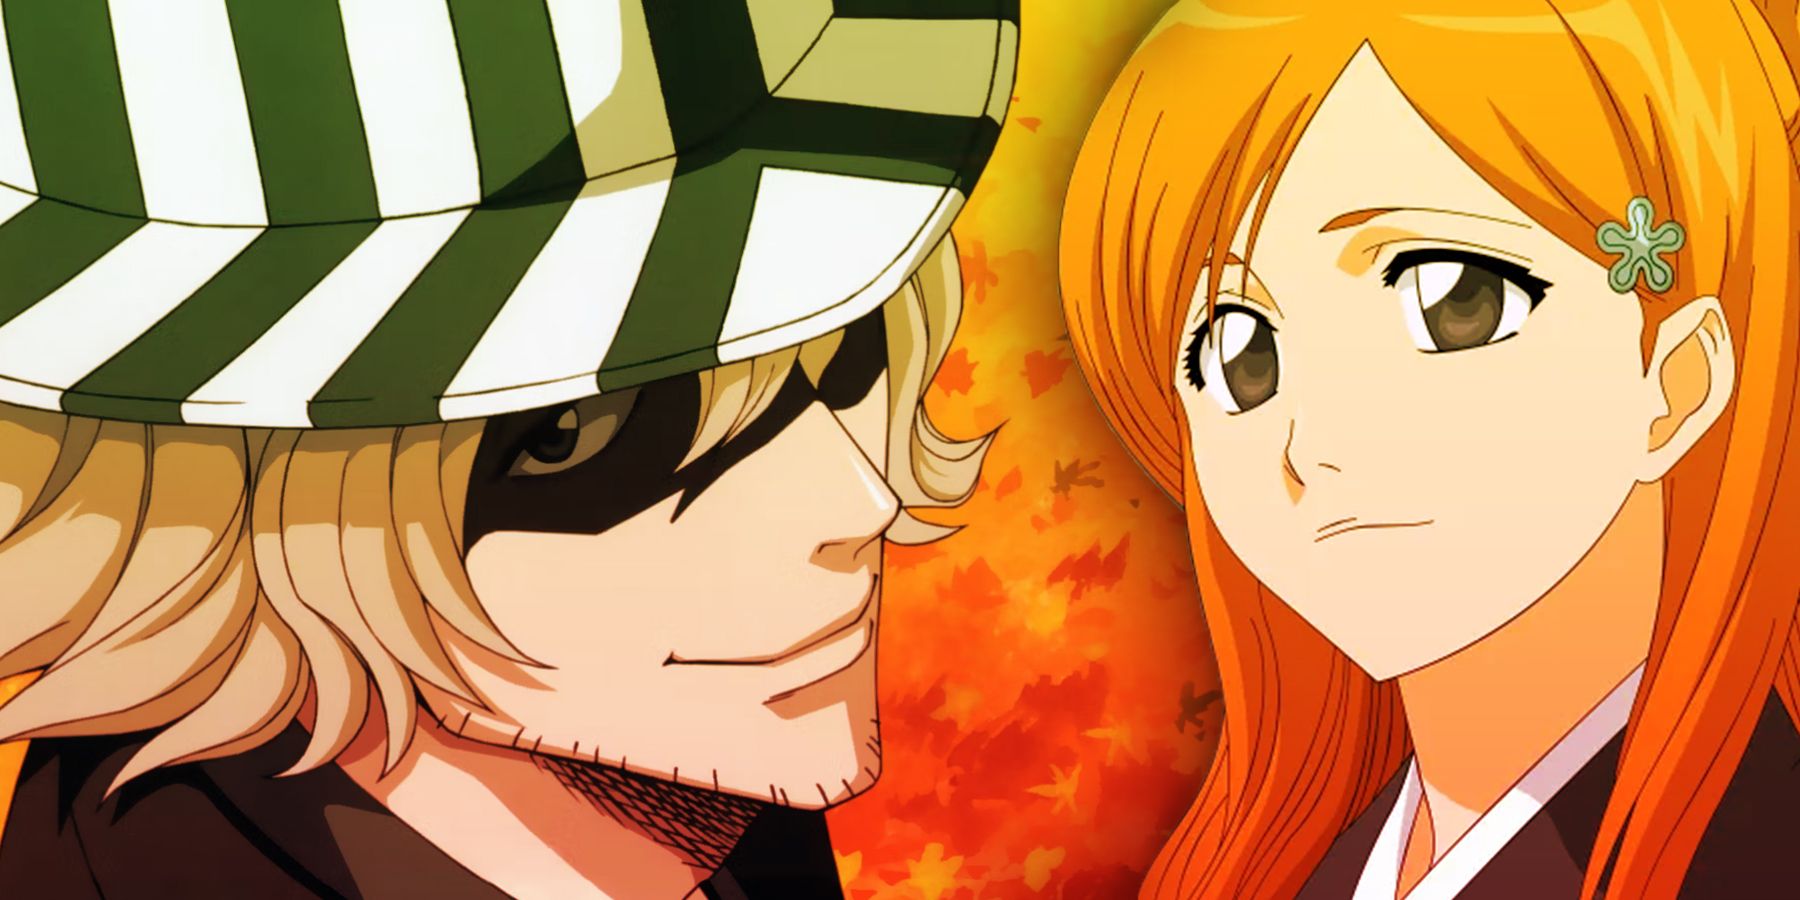 Anime Personality Types: Male & Female Character Of Every Archetype